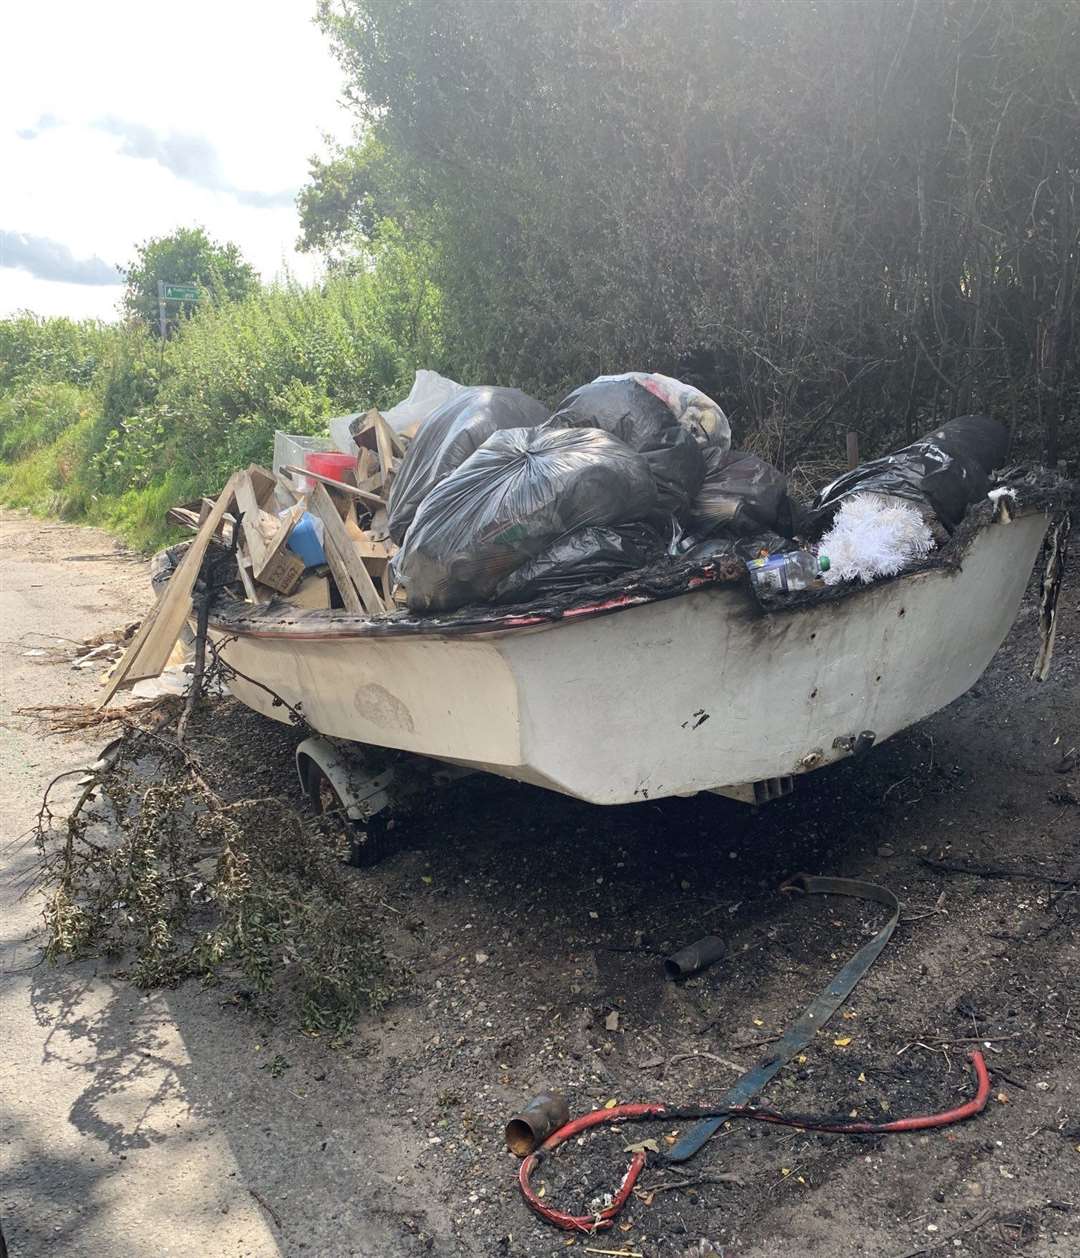 Glenda Crumpton is calling on Medway Council to move this boat full of rubbish dumped in Shawstead Road, Chatham. Image: Glenda Crumpton